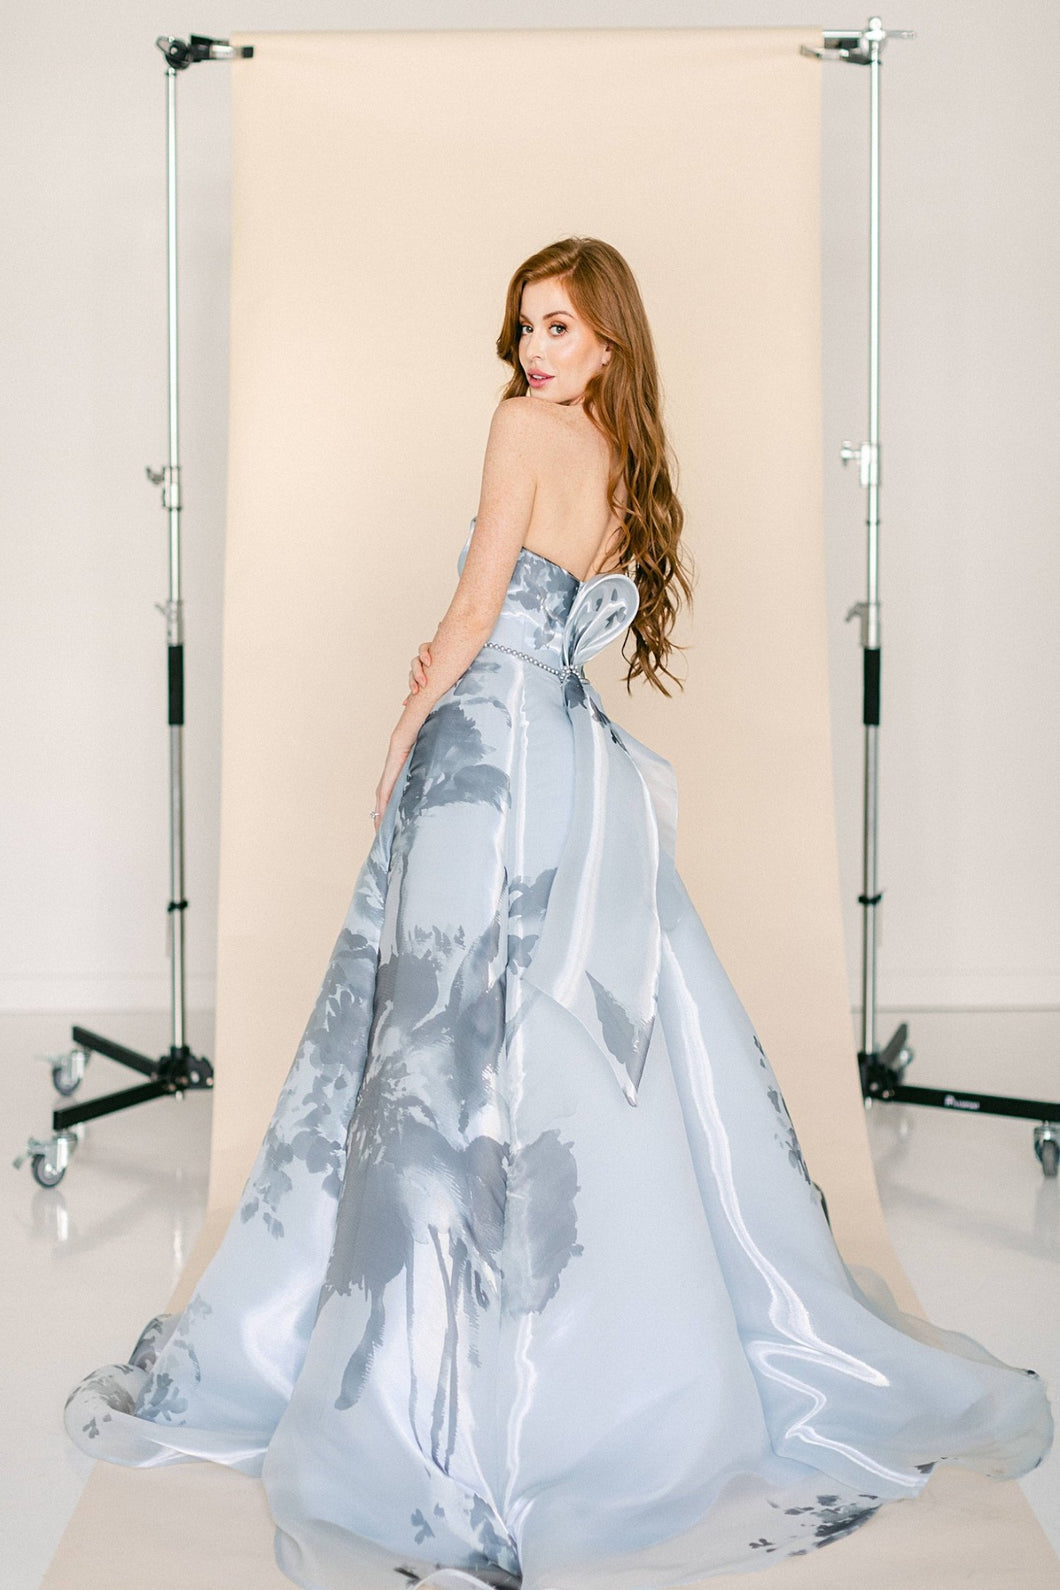 Light Blue and Black Floral Printed Ball Gown